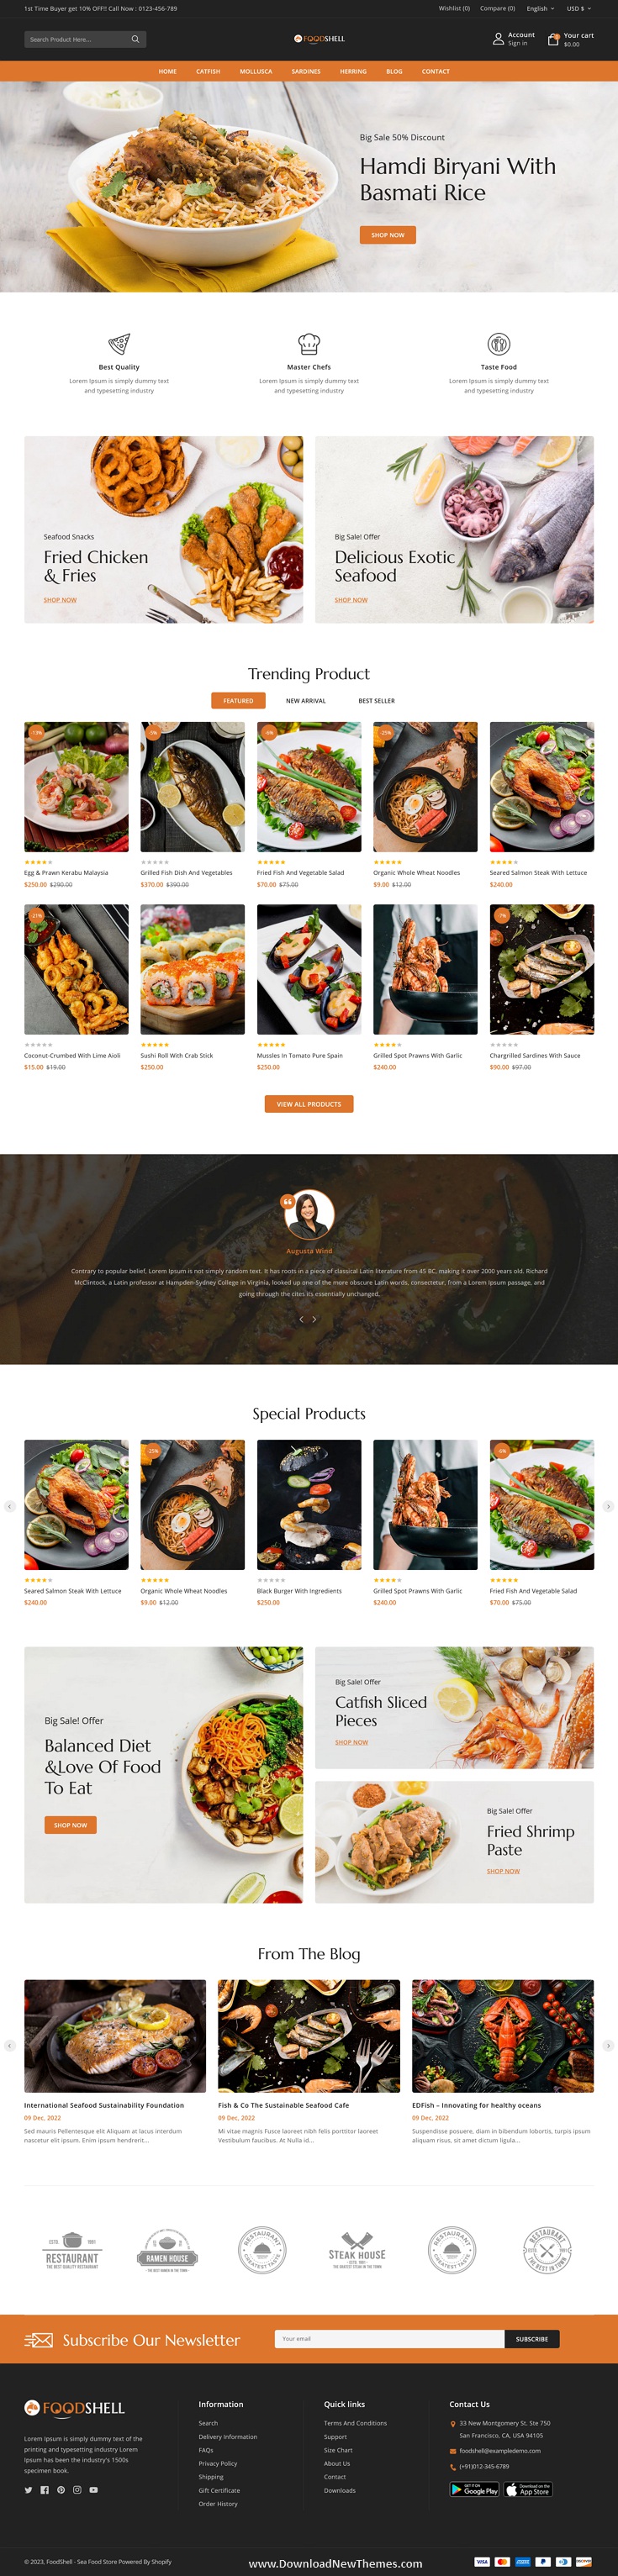 Foodshell - Sea Food Restaurant Store Shopify 2.0 Responsive Theme Review